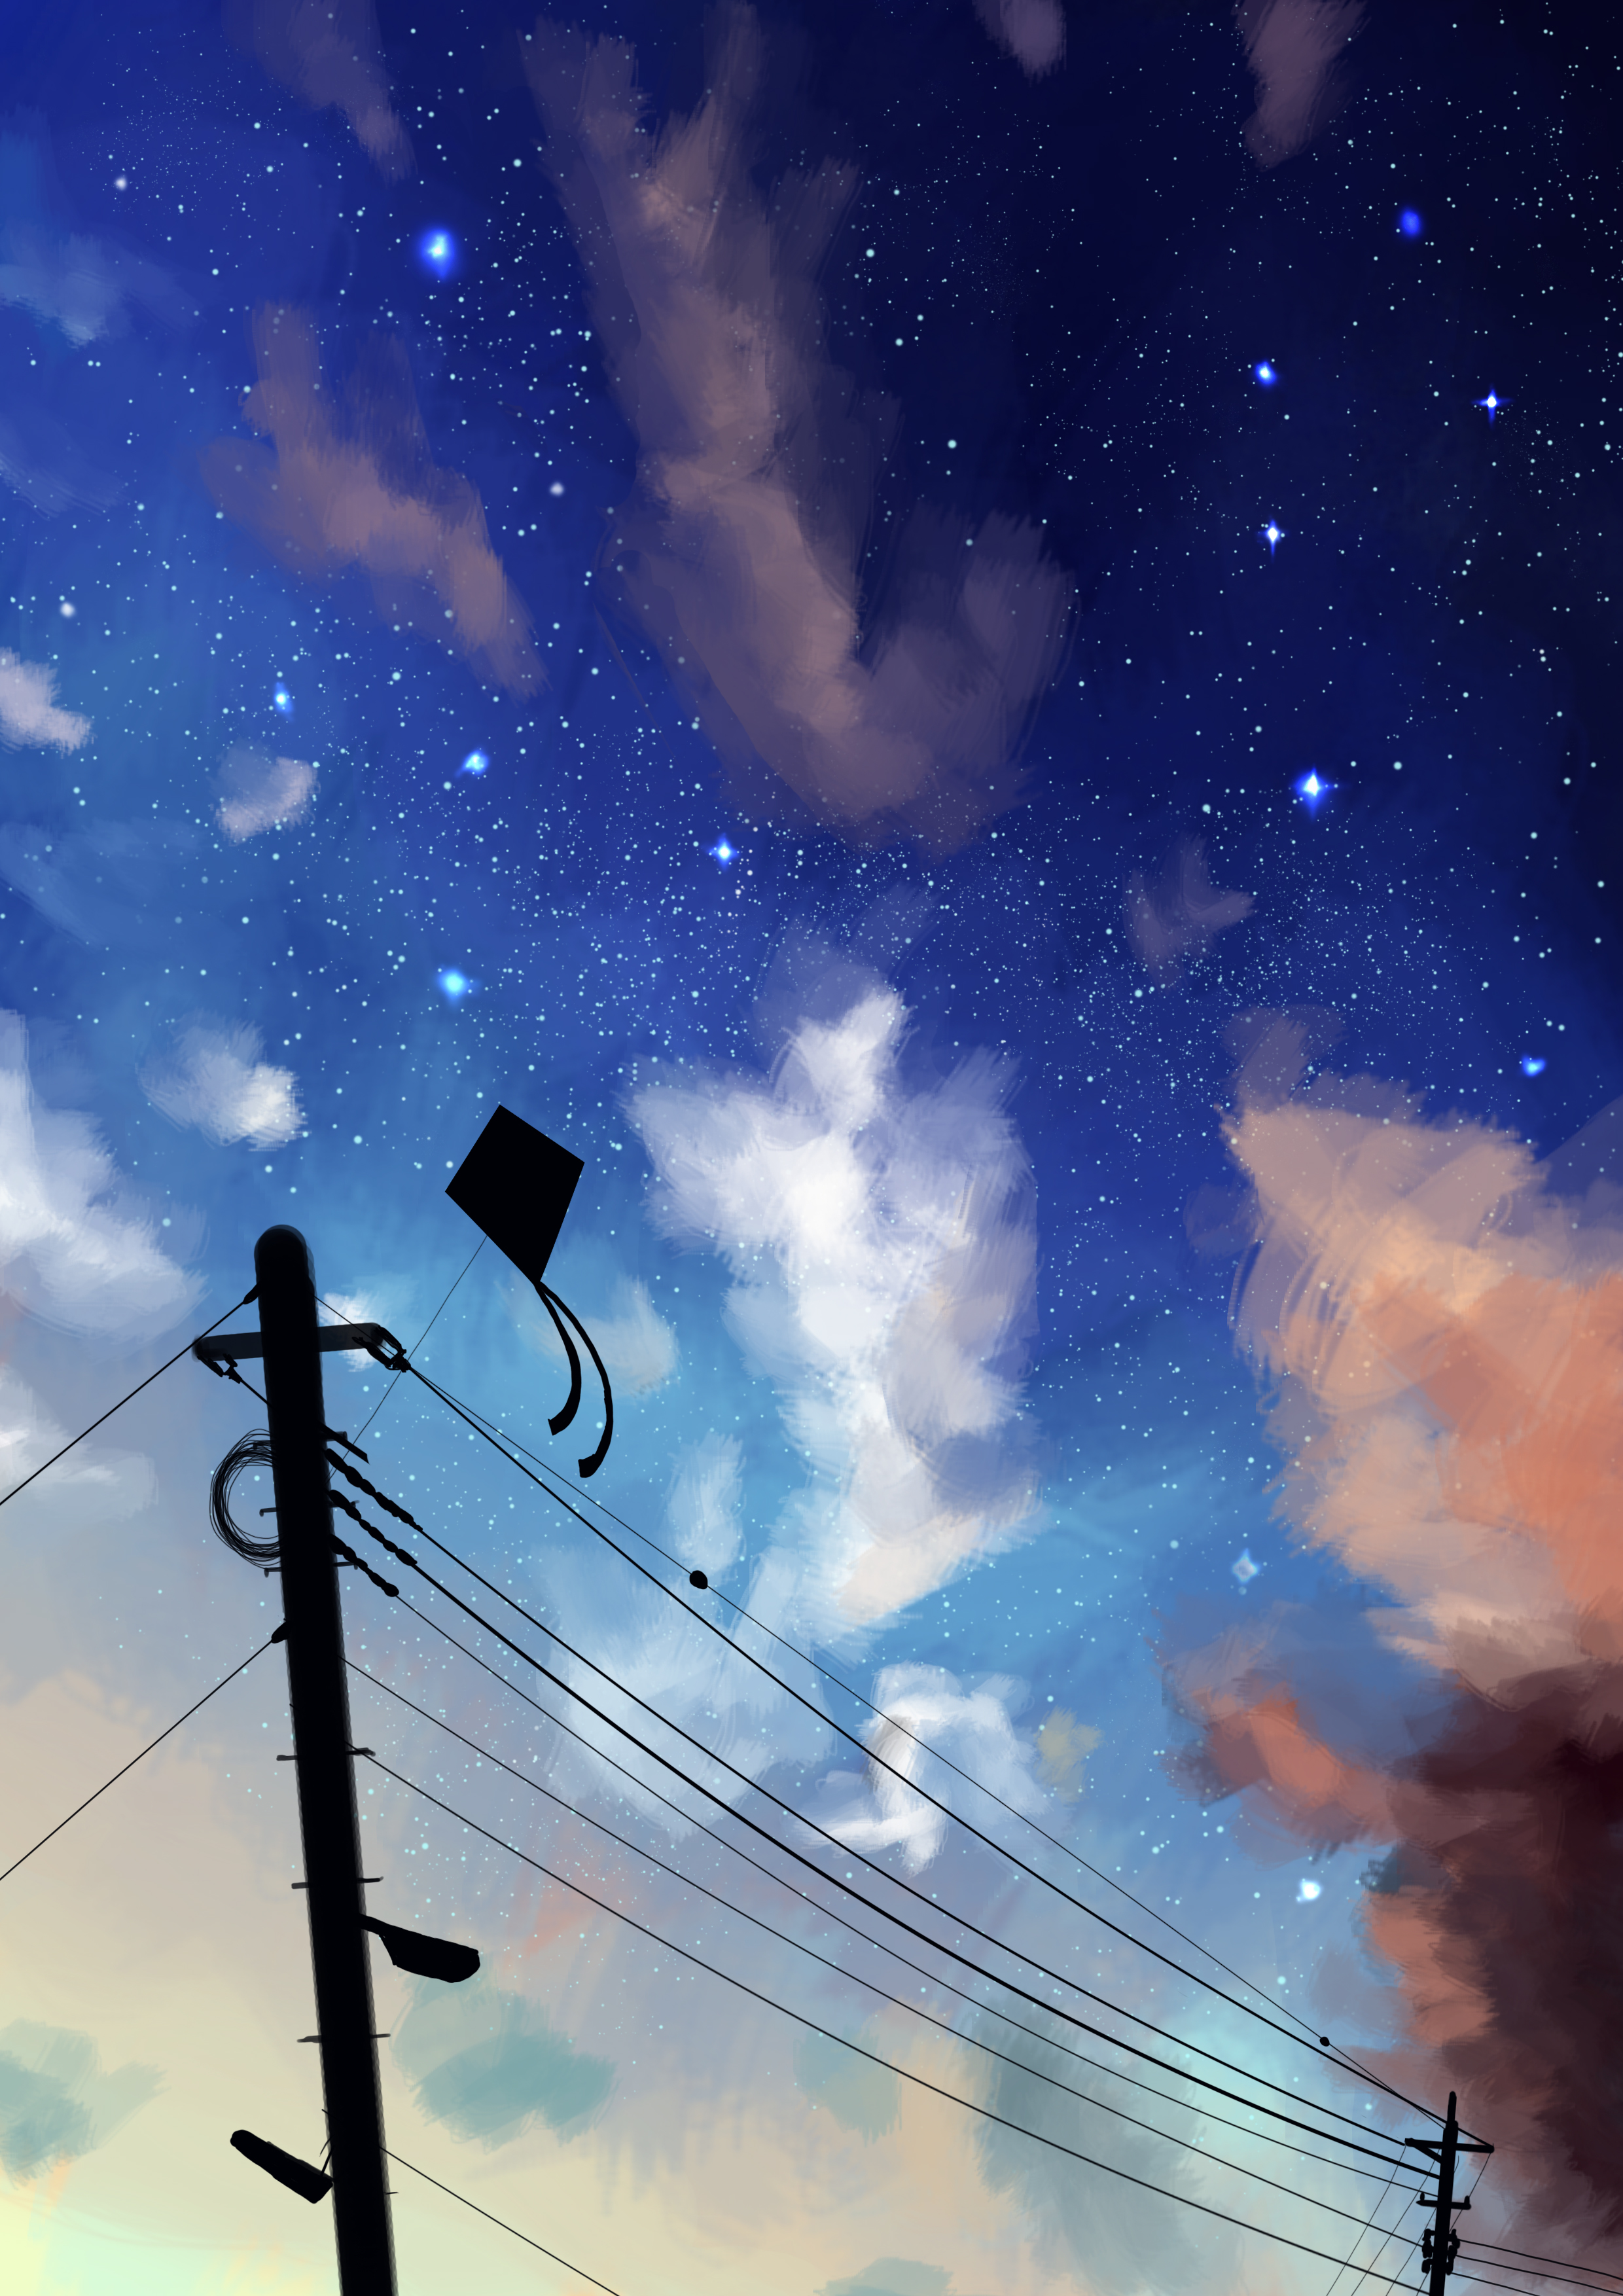 Free HD night, sky, art, clouds, wires, wire, kite